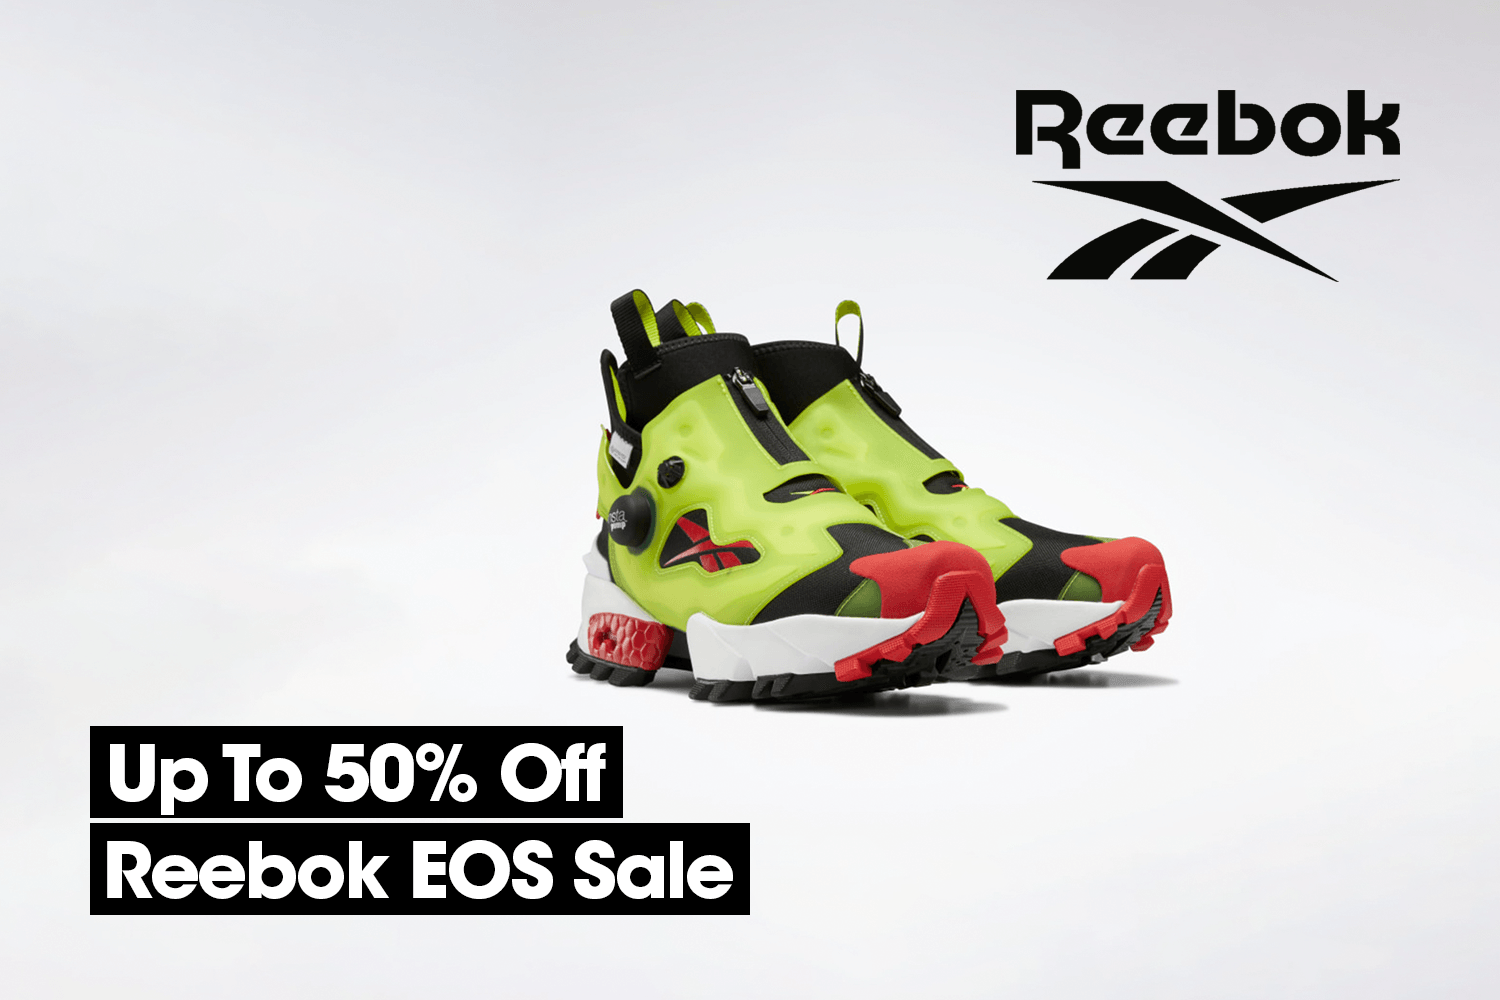 Our favourite picks from the Reebok End Of Season sale